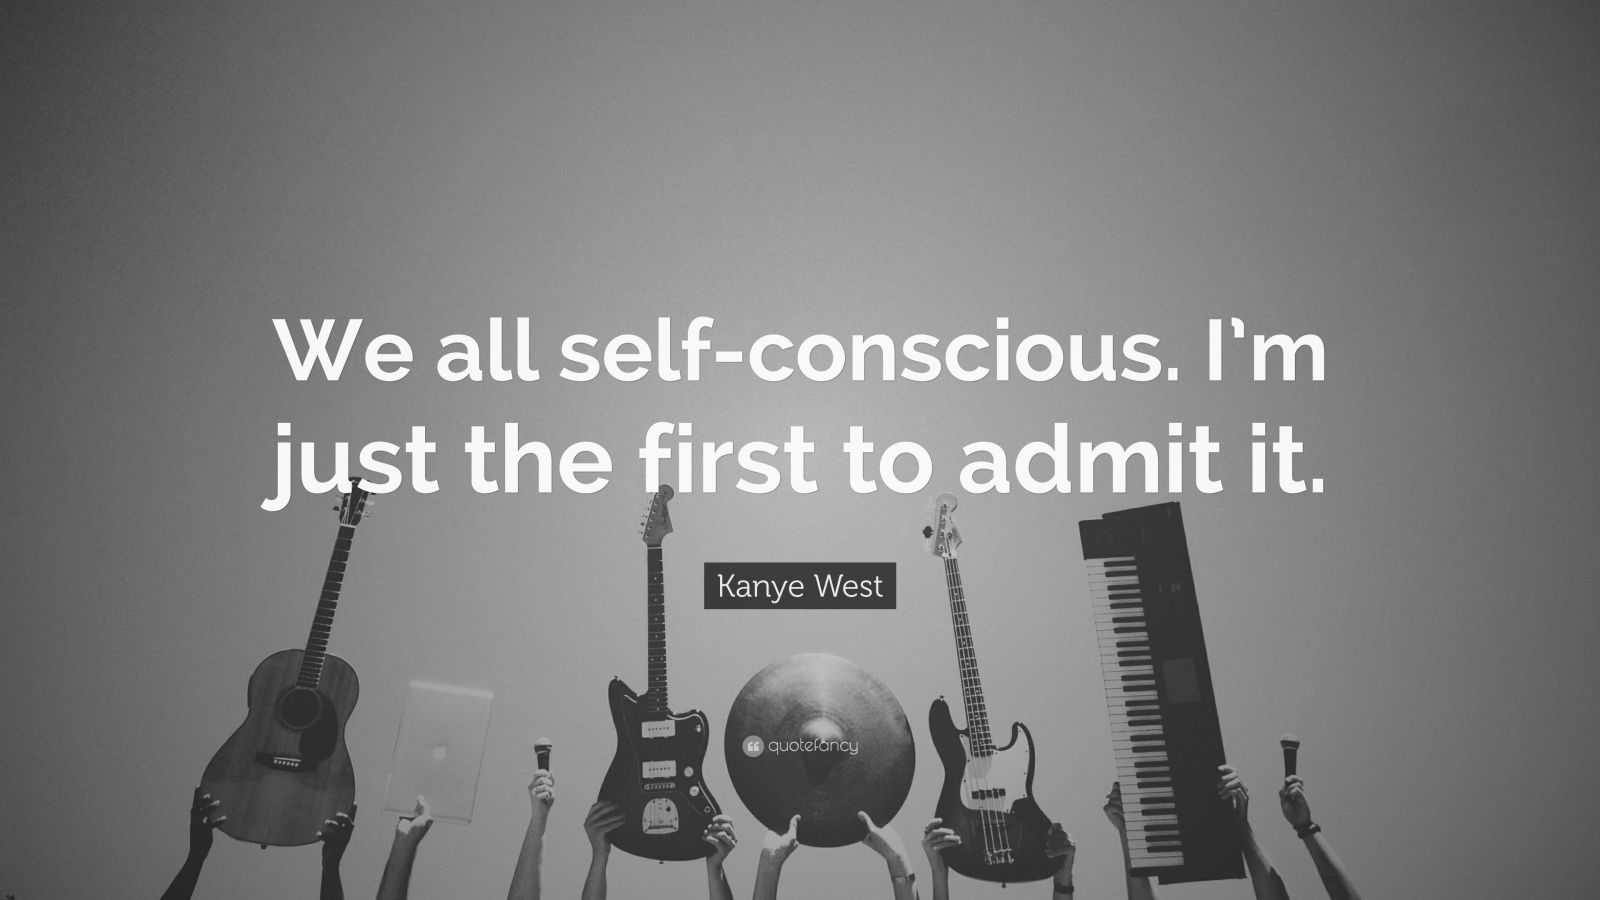 kanye west quote: "we all self-conscious.